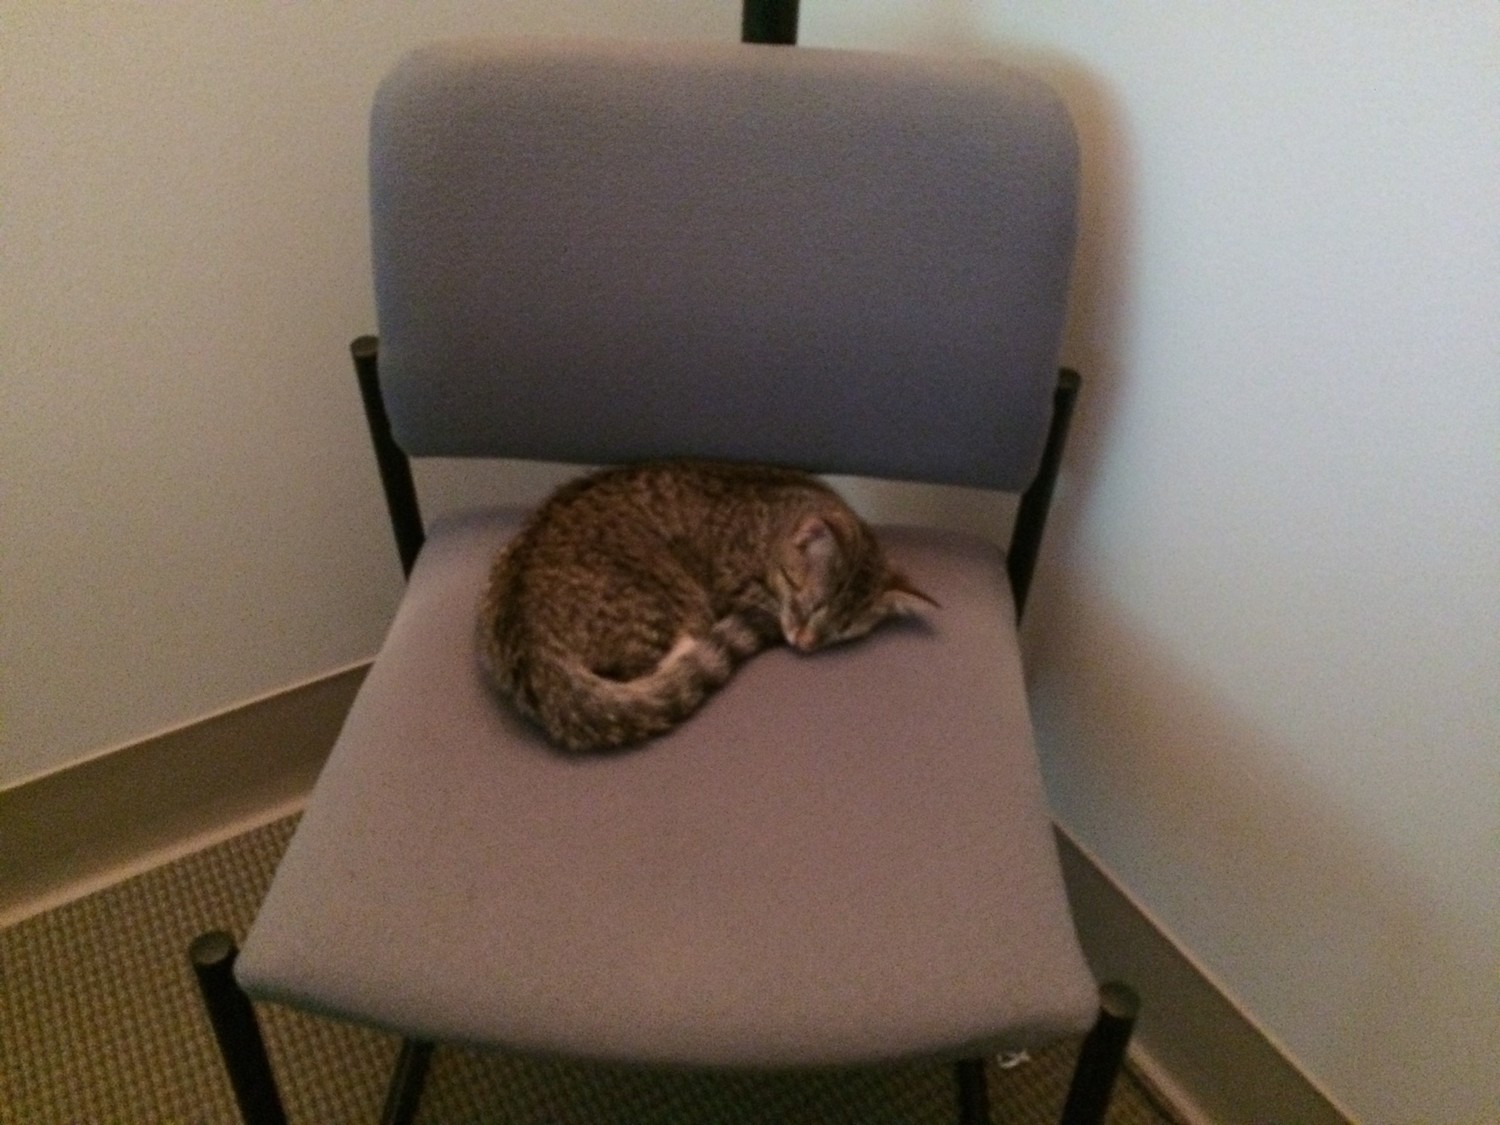 Catching a nap in the conference room.